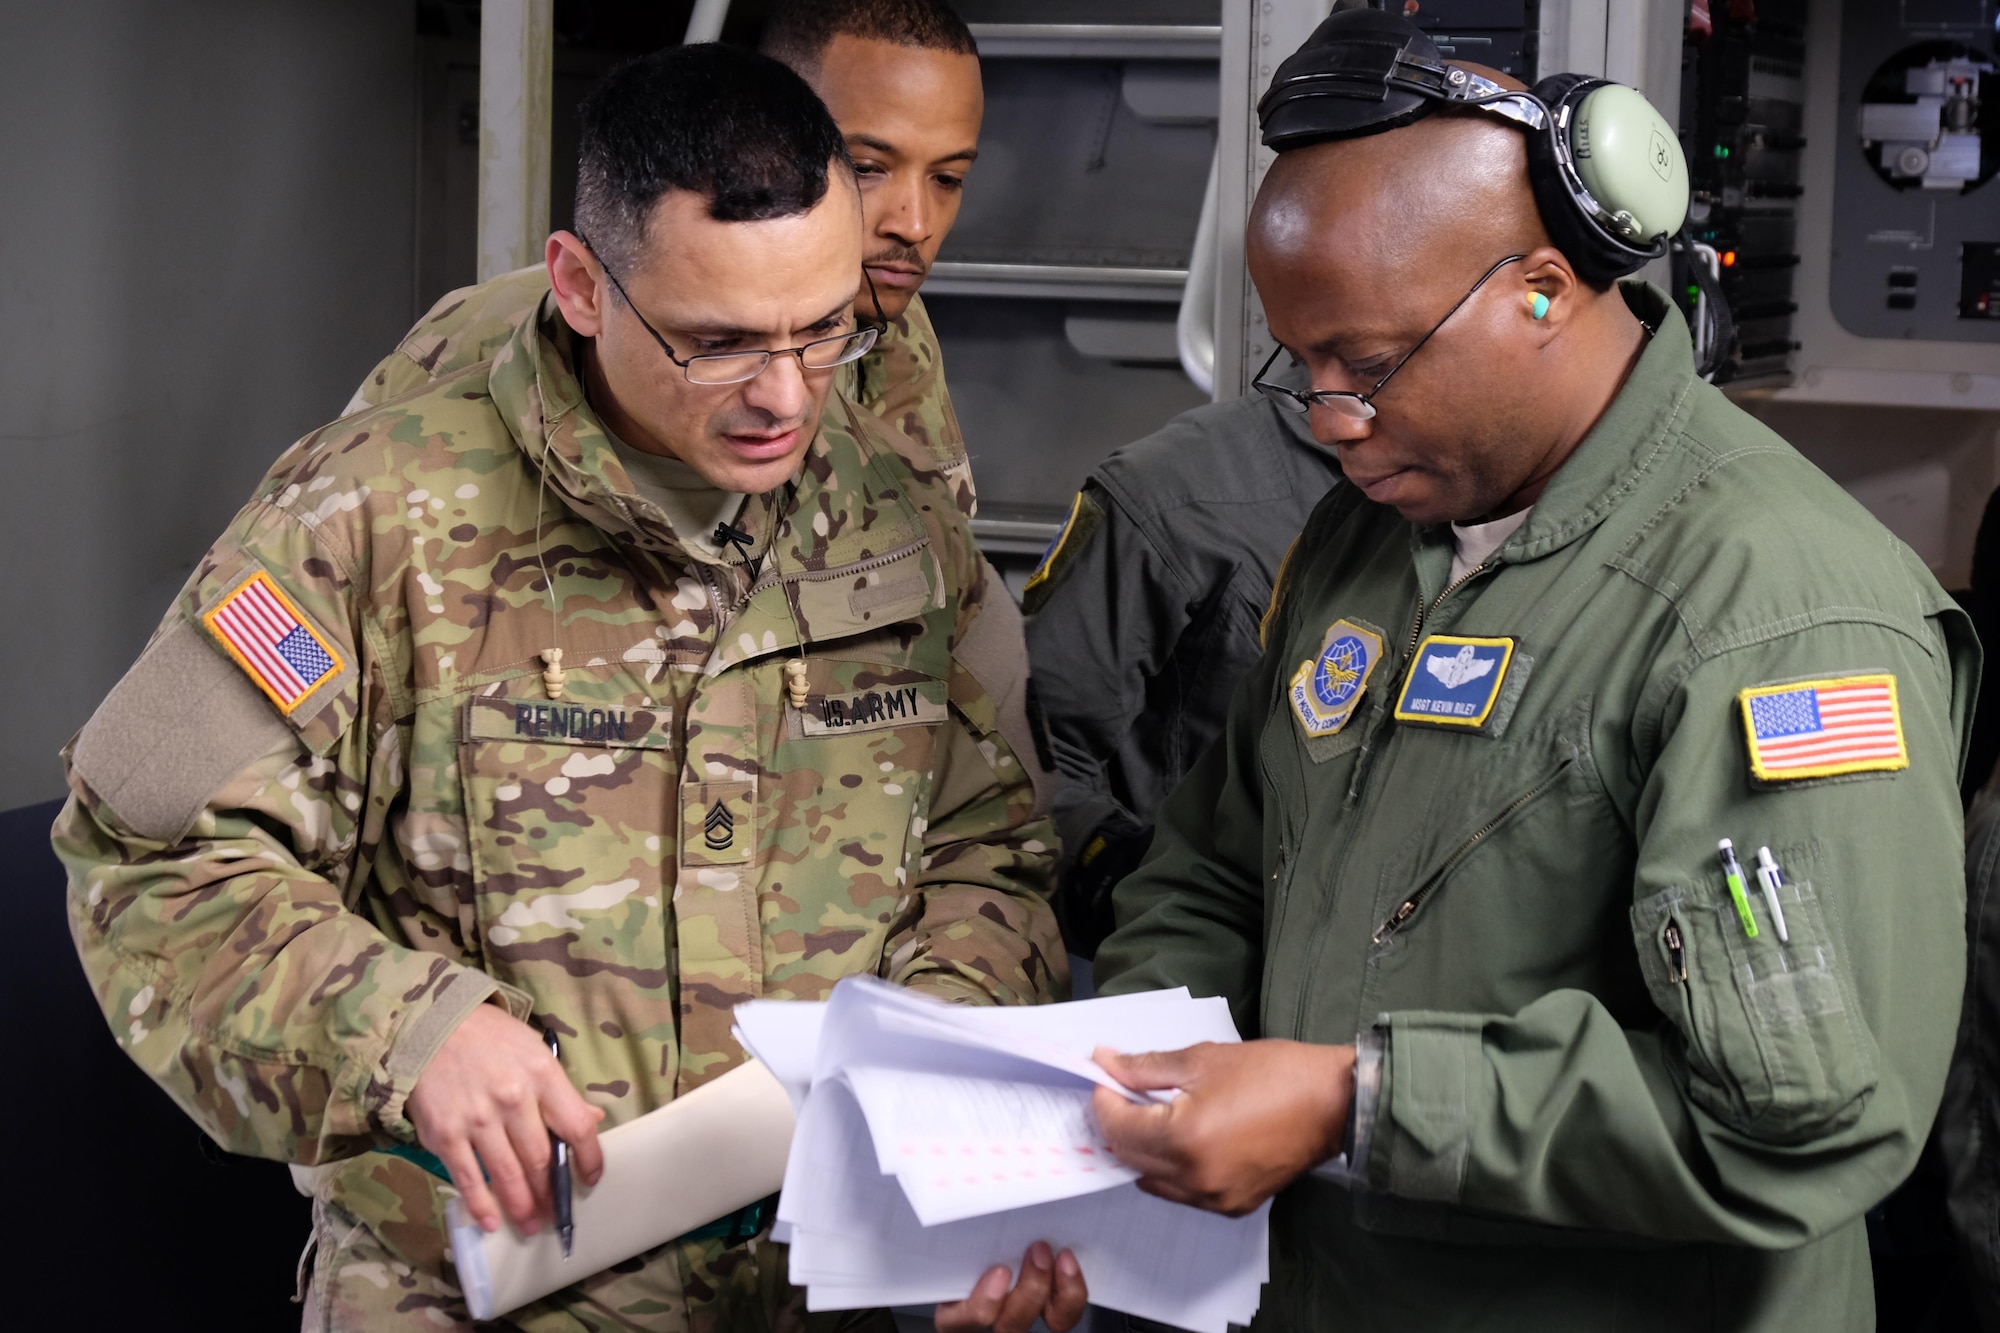 Sergeant 1st Class Joaquin Rendon and Master Sgt. Kevin Riley review the load plan during joint partnered movement control operations with French Air Force members Feb. 22, 2016, in support of United States Africa Command’s Operation Echo Casemate resupply mission to French military forces deployed to the Central African Republic. Riley is an instructor load master assigned to 14th Air Squadron Joint Base Charleston Air Force Base, South Carolina. (Photo by Sgt. 1st Class Matthew Chlosta)